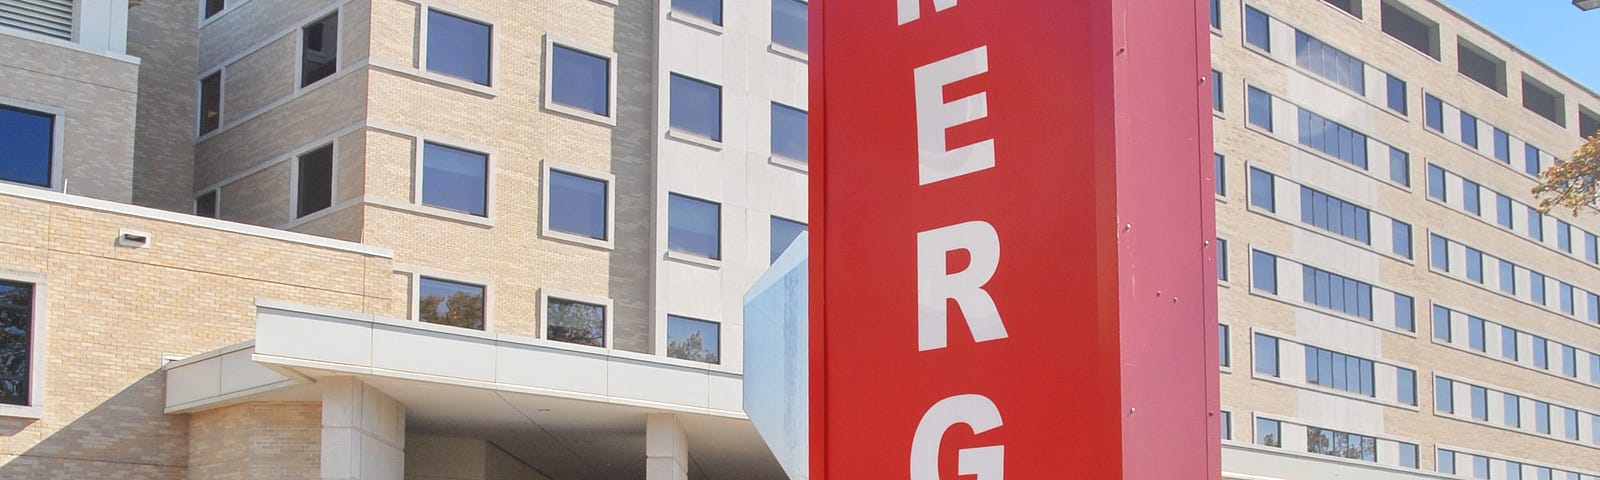 A hospital building with Emergency Sign in red.